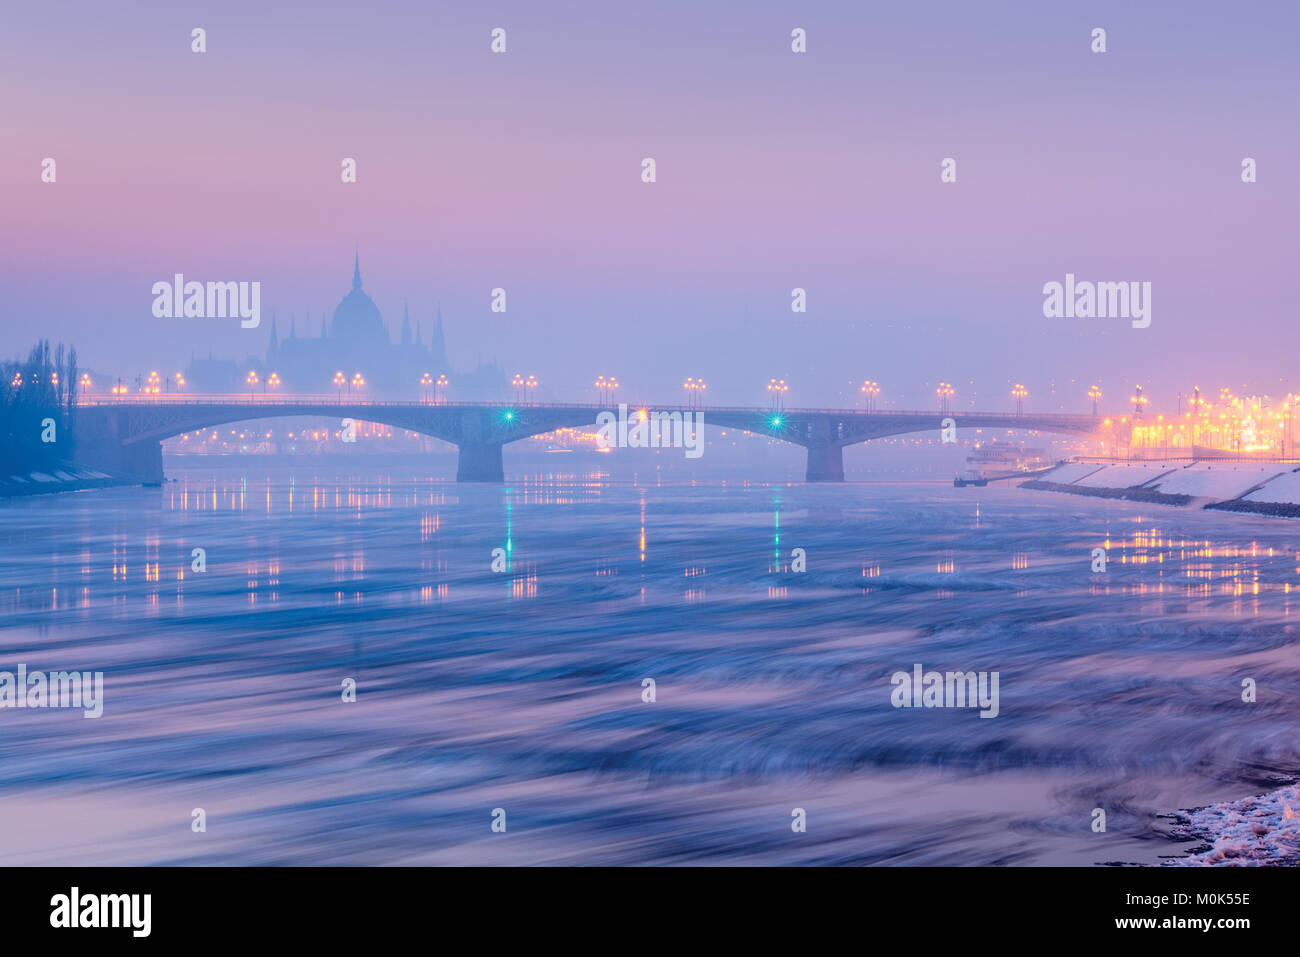 Floes on the river, Margaret bridge, Parliament outline in morning winter haze, Budapest Stock Photo